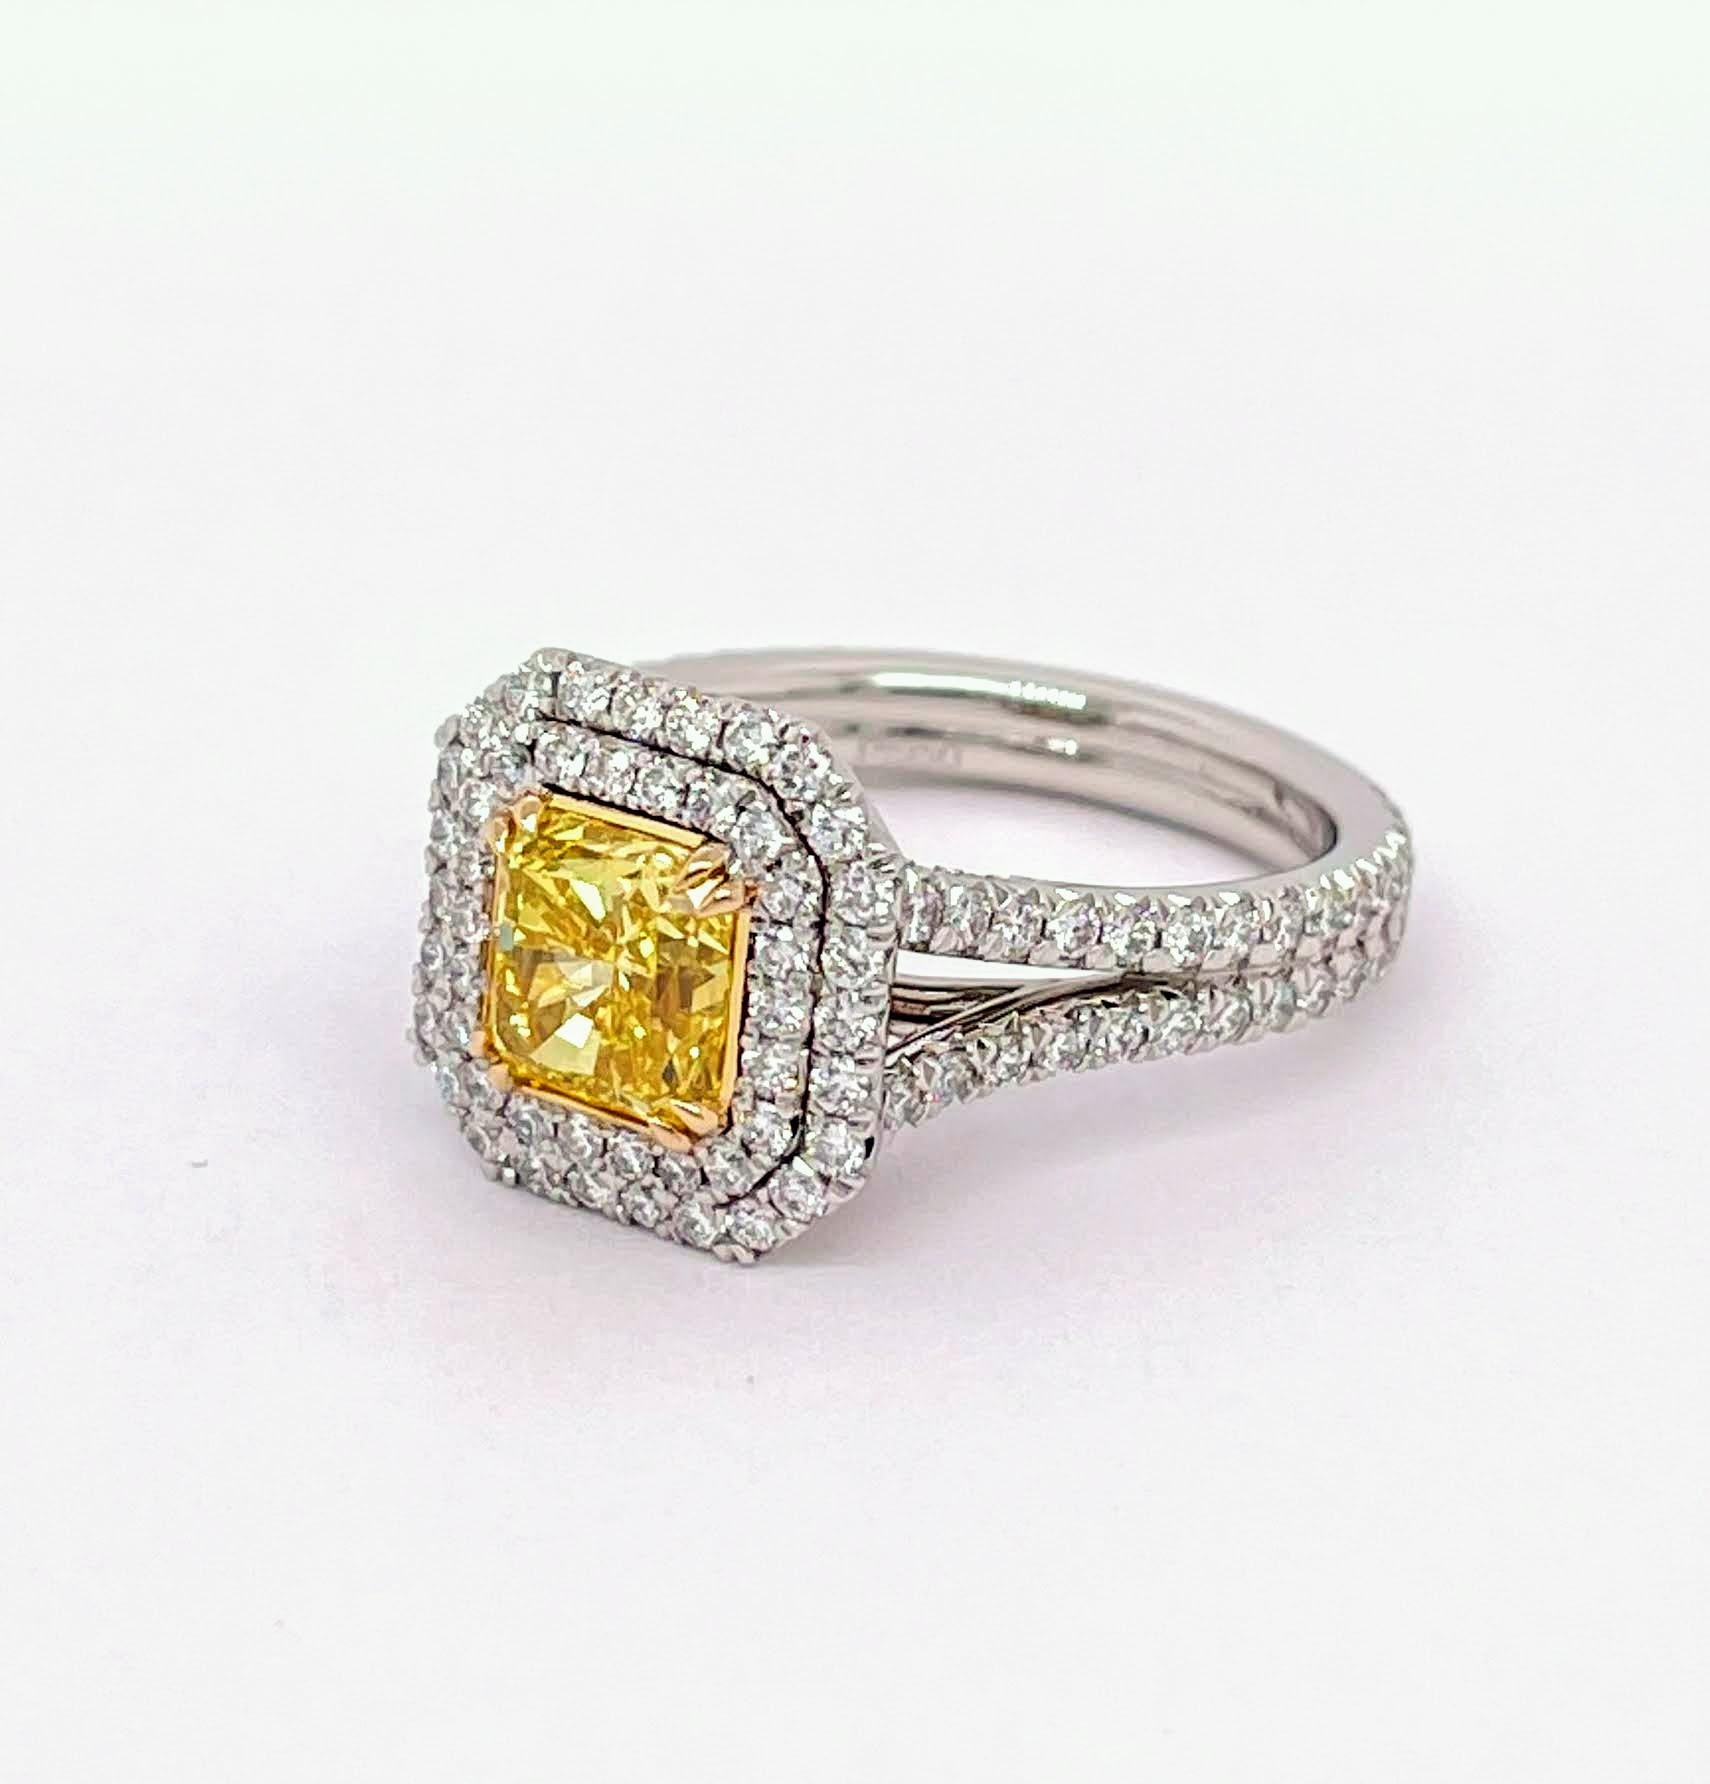 GIA Certified Round Shape Cut Diamond 1.55, Fancy Vivid Yellow Color VVS1 Clarity with 1.16 total carat weight of the double halo and shank which gorgeously makes the ring even special. Mounted a Platinum setting and  18K Yellow Gold basket and